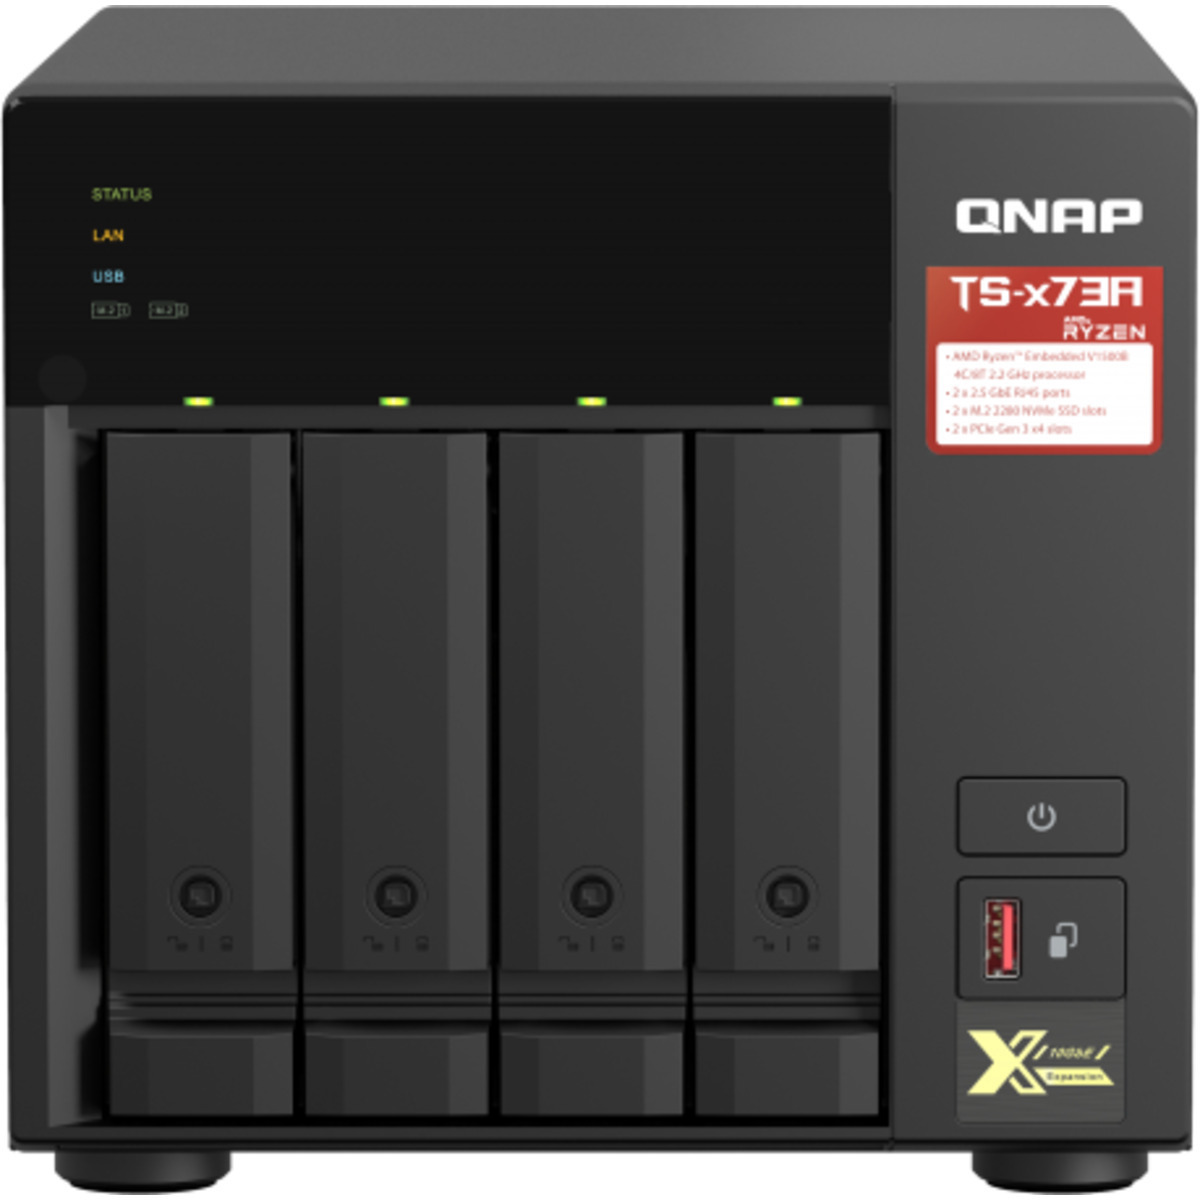 QNAP TS-473A 32tb 4-Bay Desktop Multimedia / Power User / Business NAS - Network Attached Storage Device 4x8tb Western Digital Red Pro WD8003FFBX 3.5 7200rpm SATA 6Gb/s HDD NAS Class Drives Installed - Burn-In Tested TS-473A